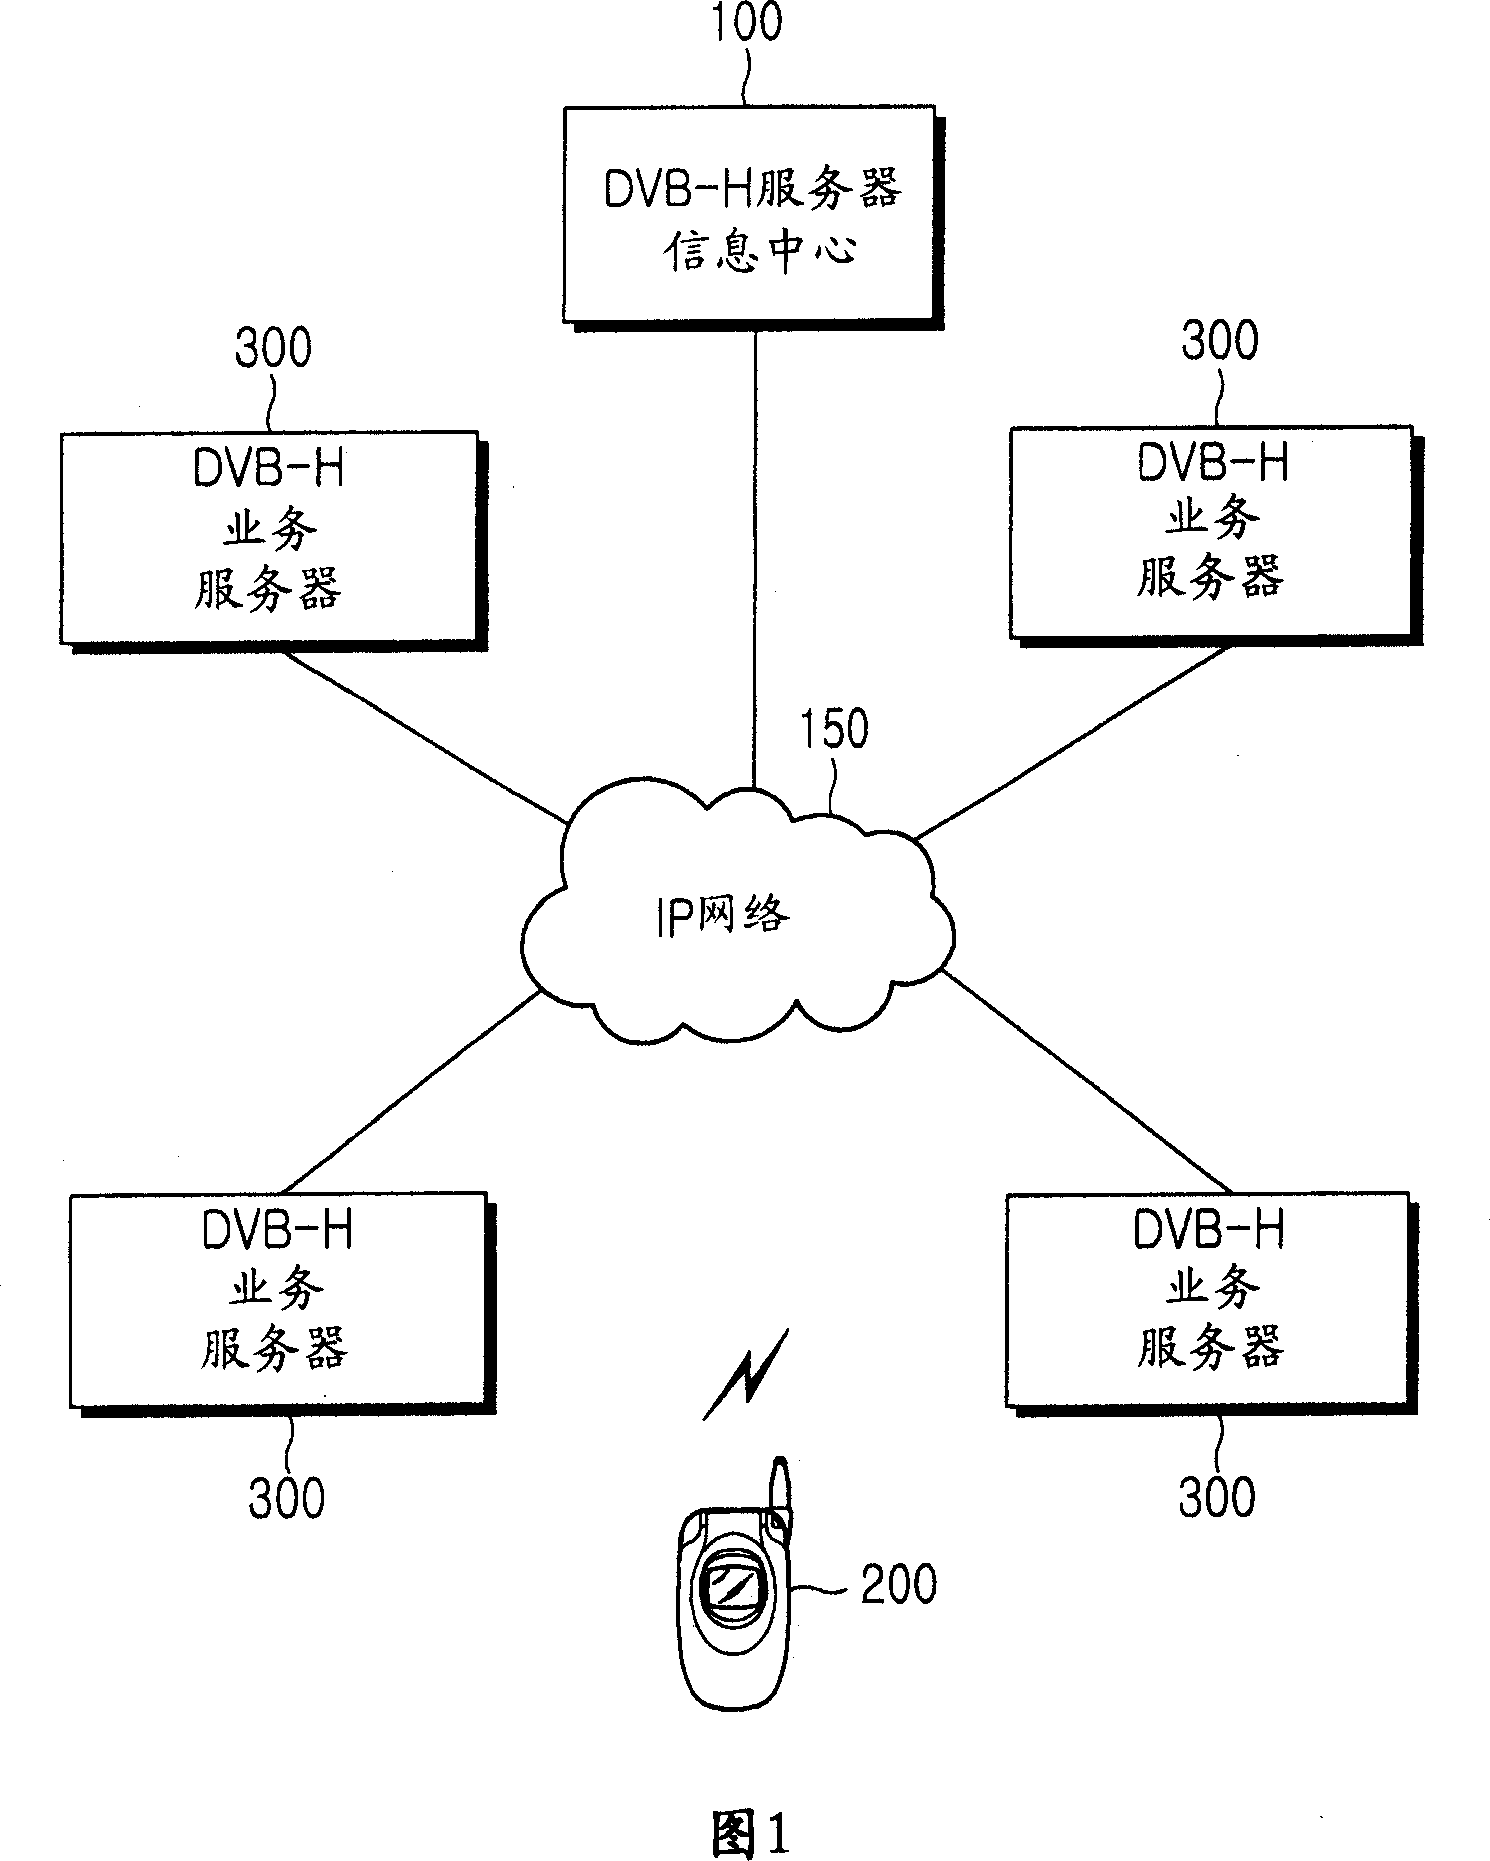 DVB-H service system and method for providing broadcasting service information in dvb-h service system